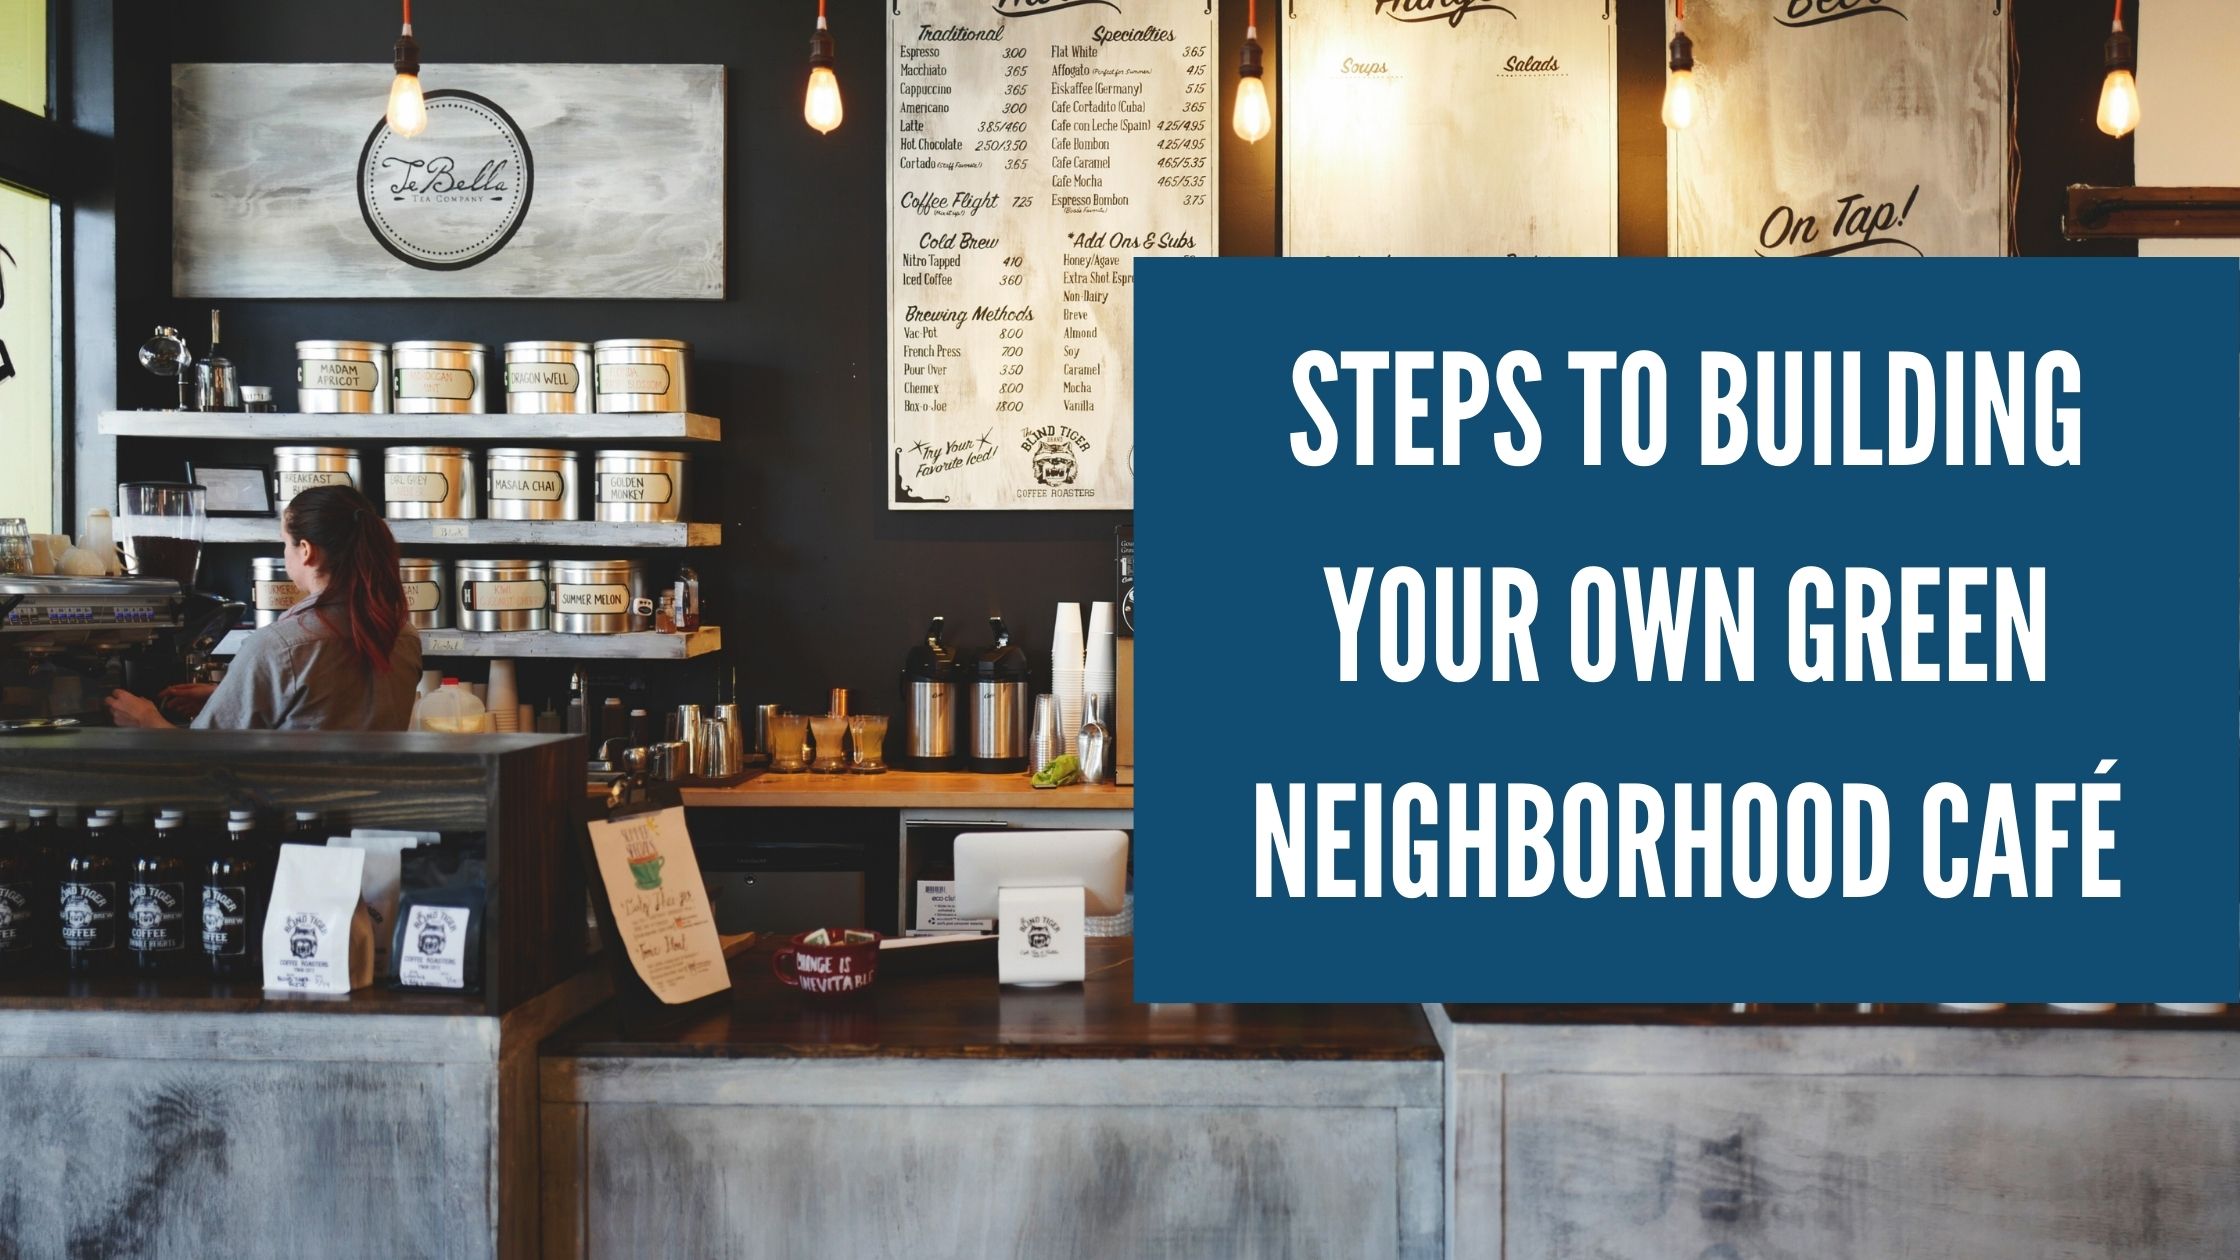 Steps to Building Your Own Green Neighborhood Café